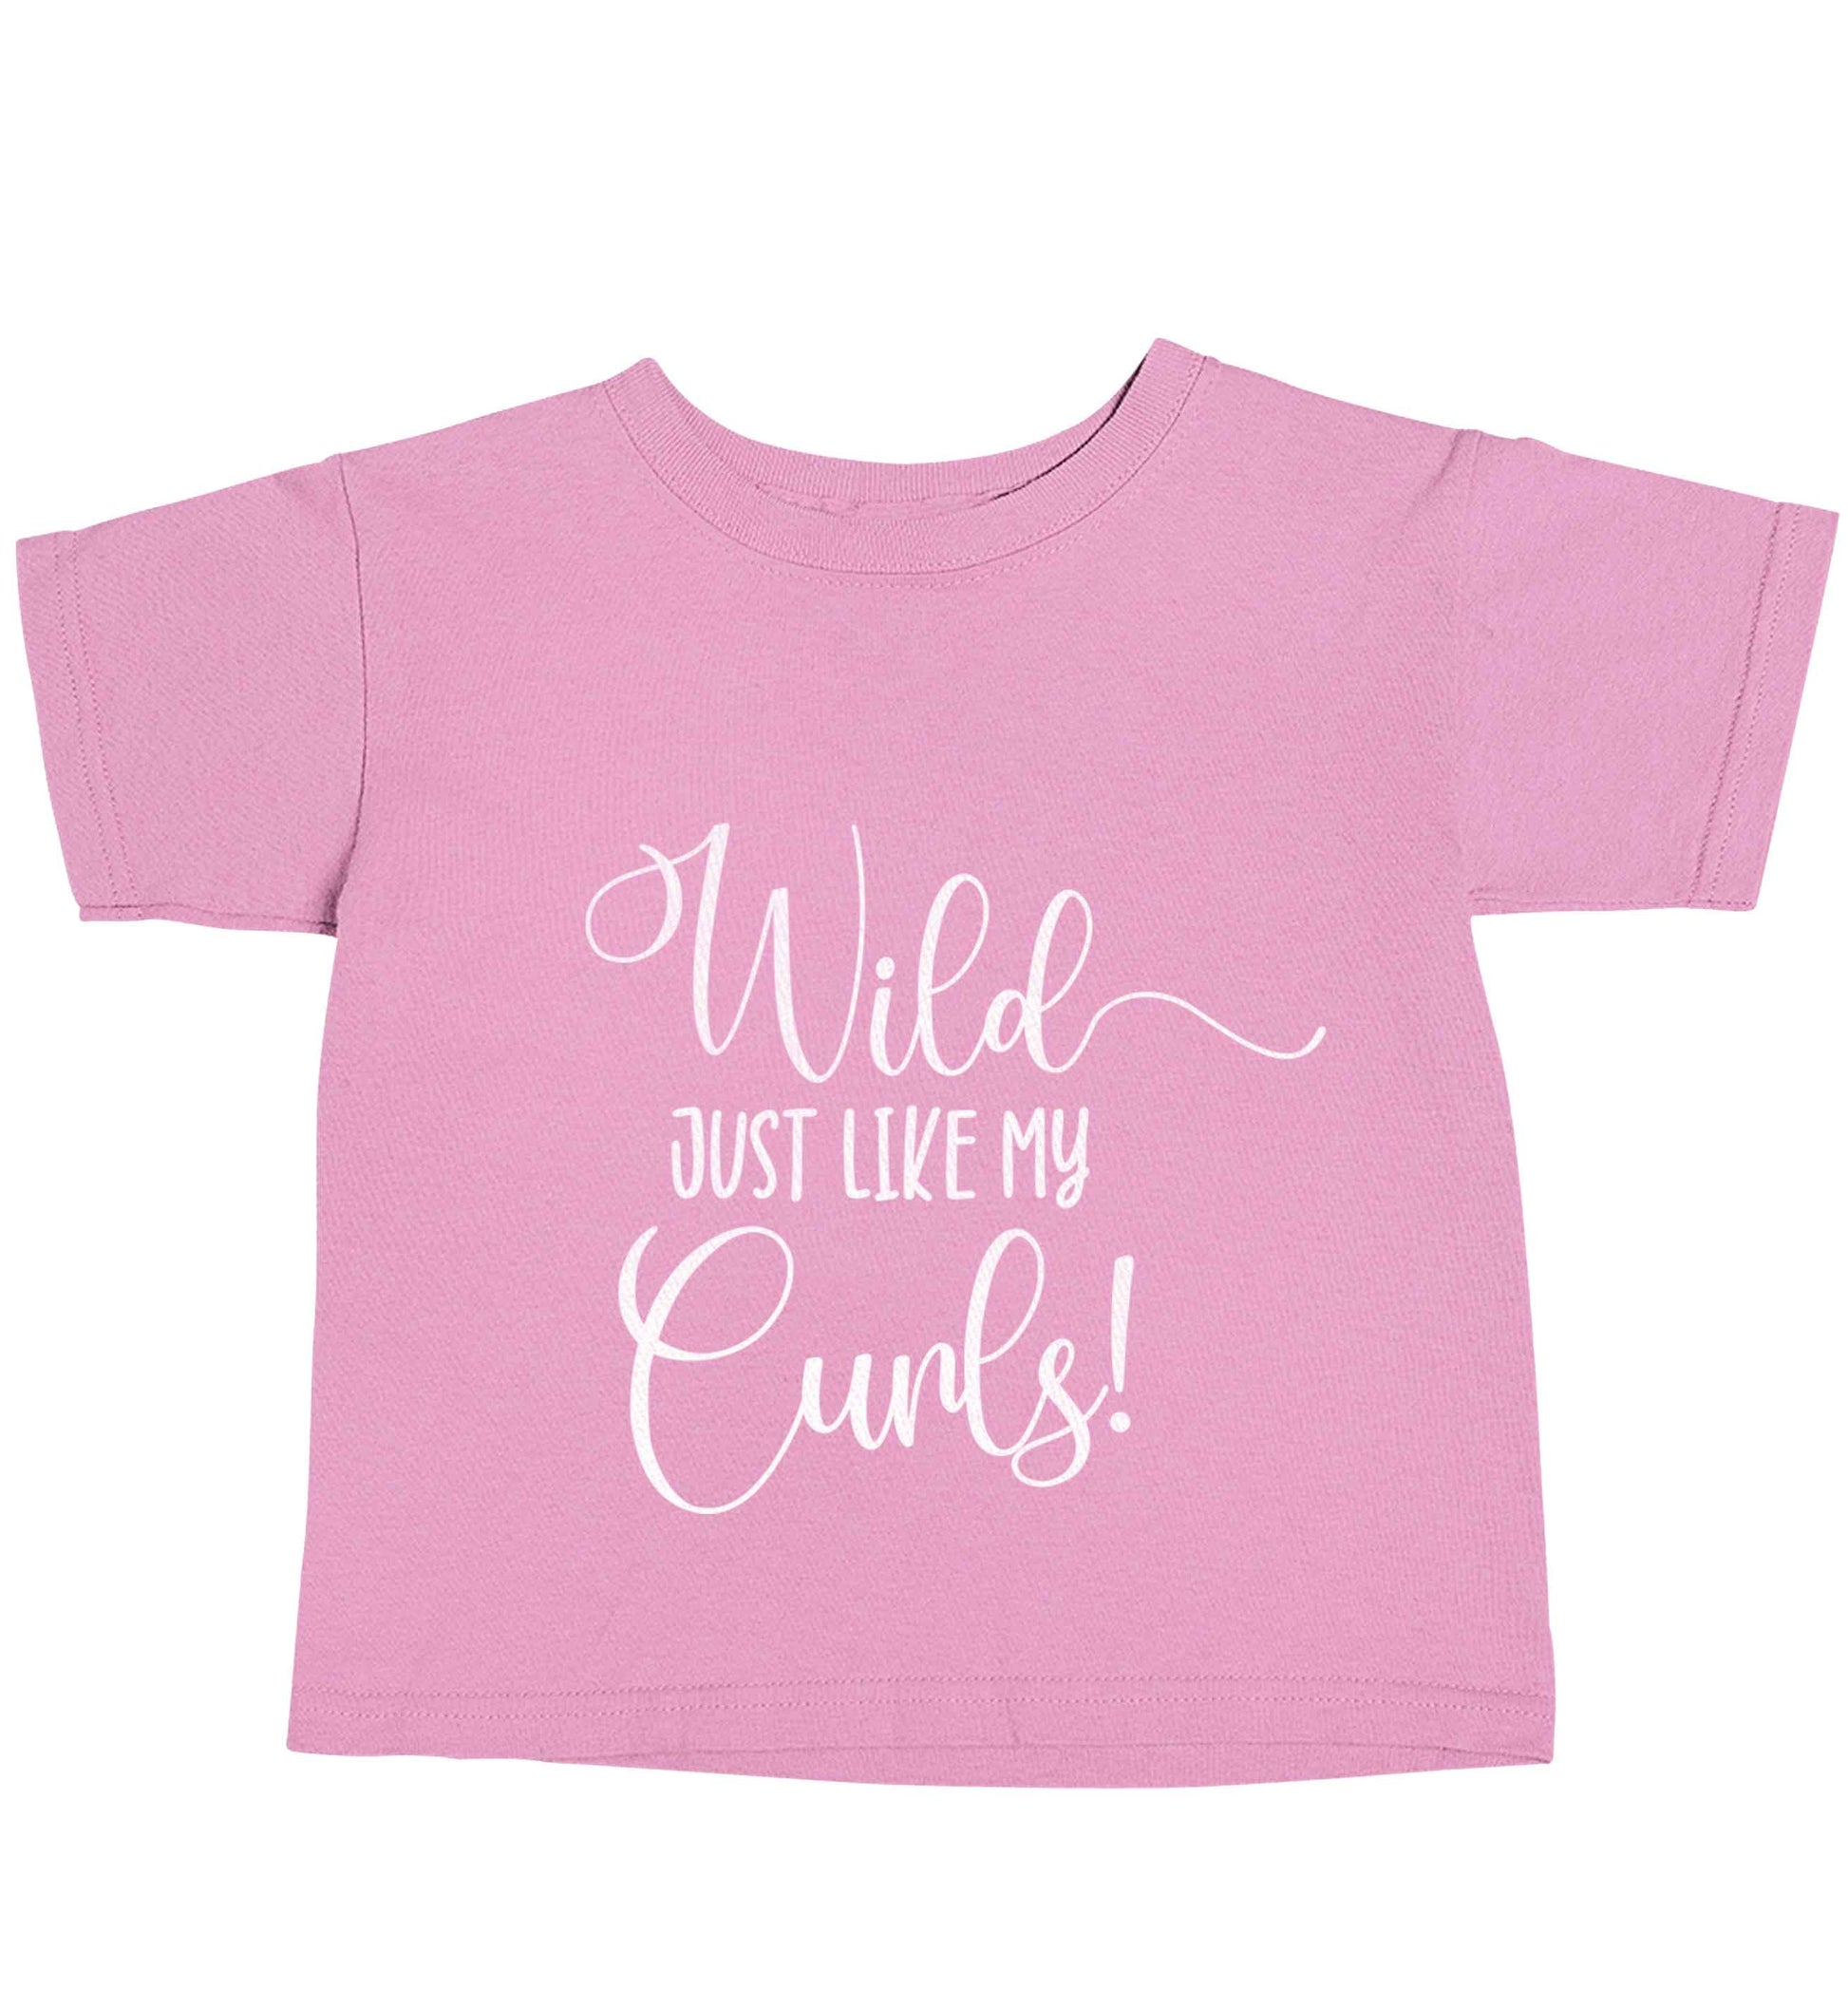 Wild just like my curls light pink baby toddler Tshirt 2 Years